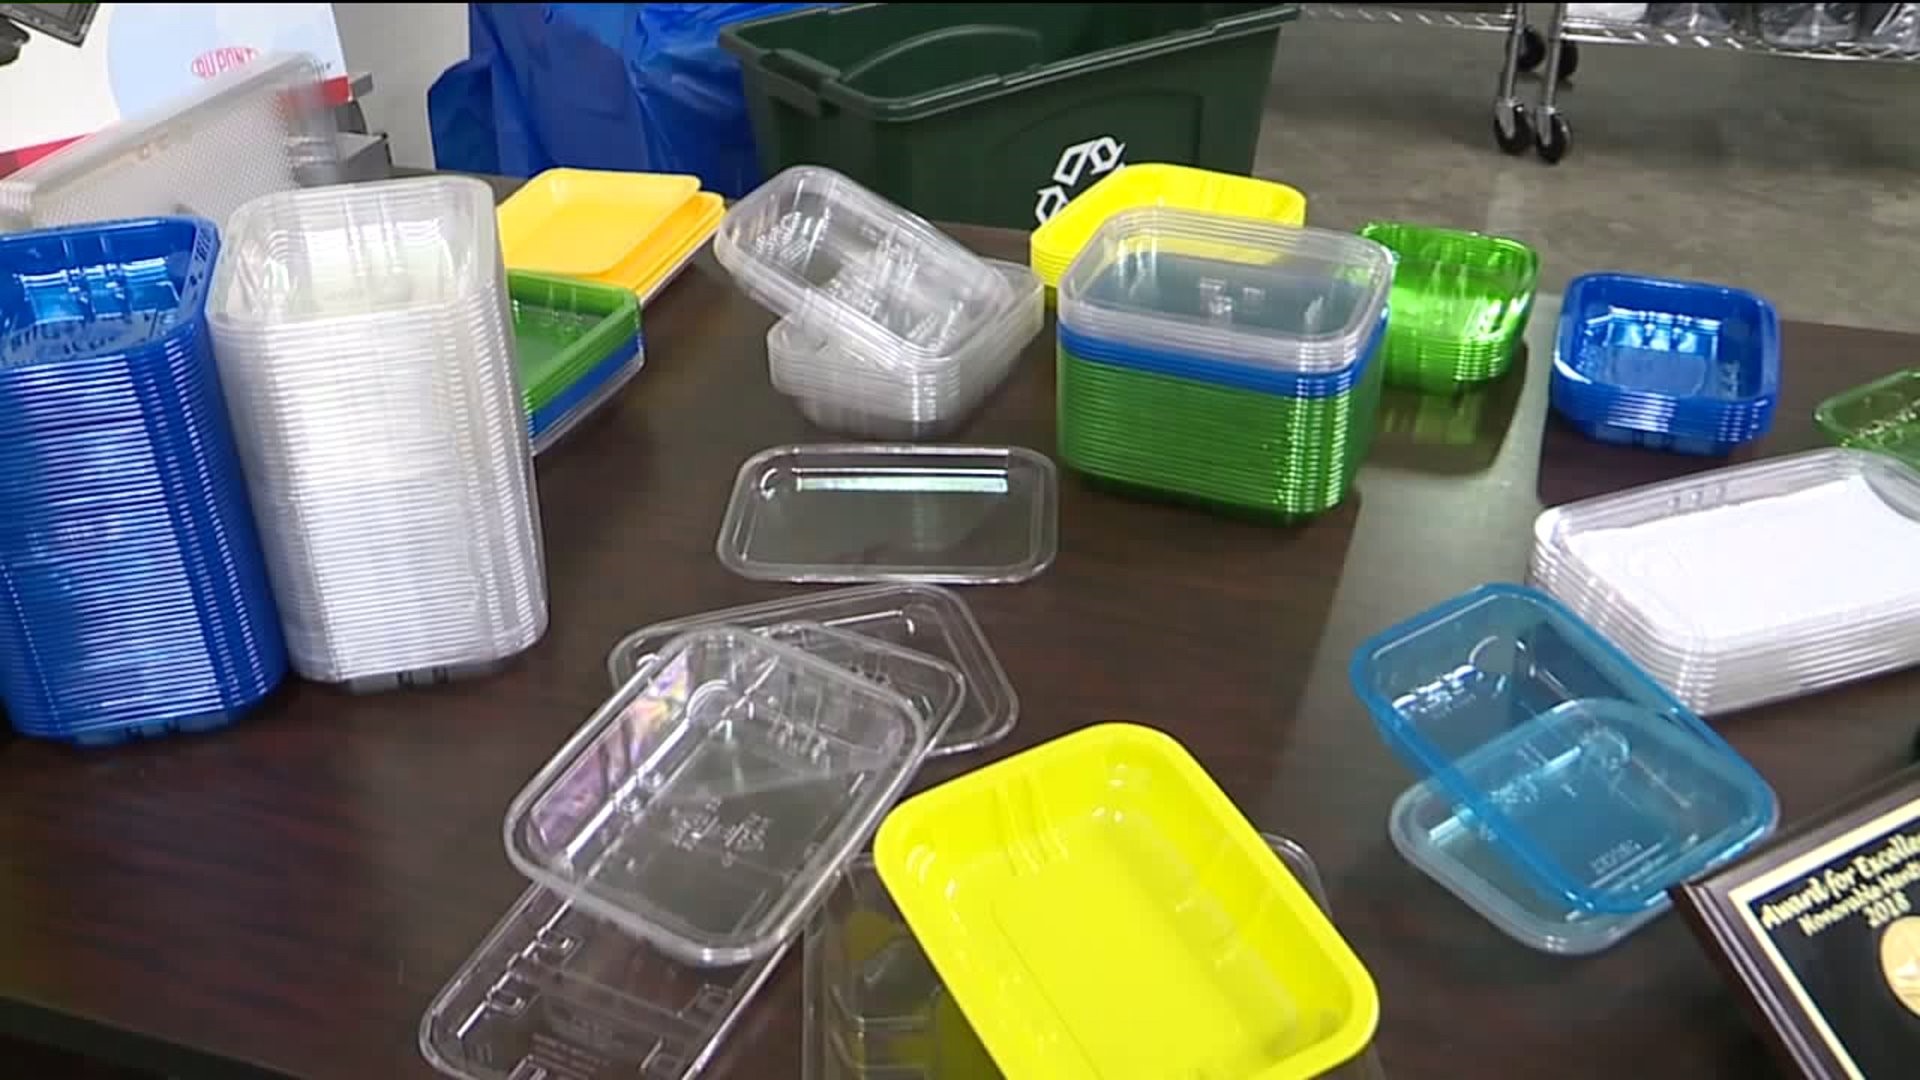 Recyclable Meat Trays Made in Schuylkill County